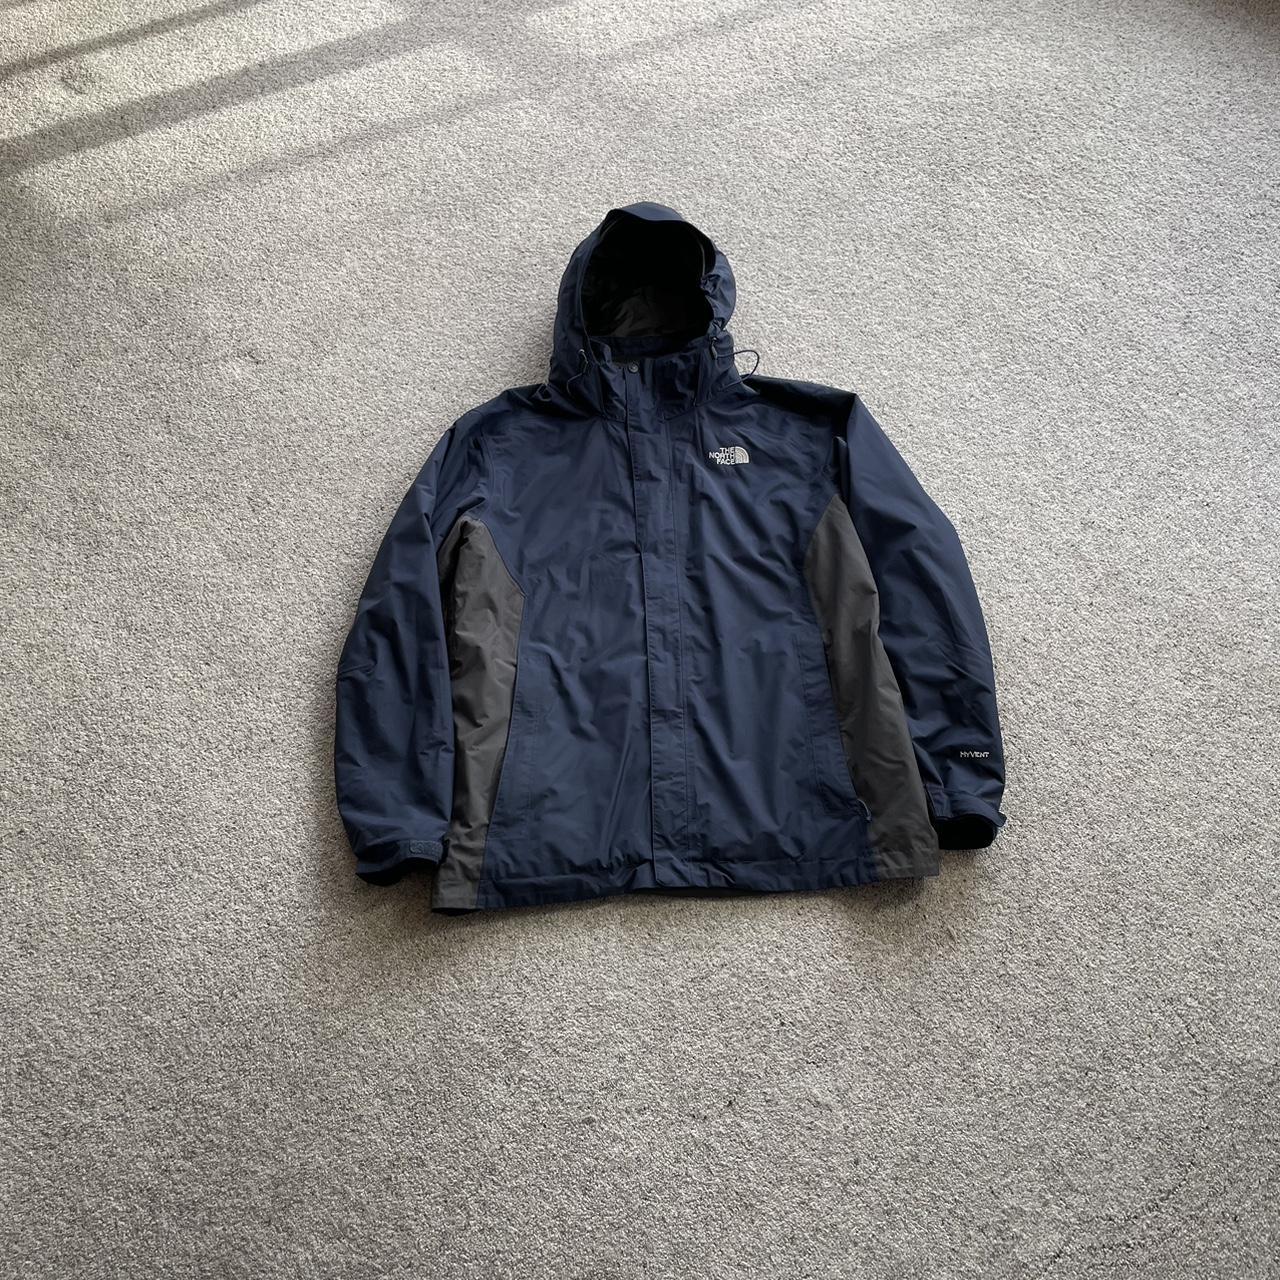 Two Tone Navy & Grey The North Face 3 in 1 Hyvent... - Depop